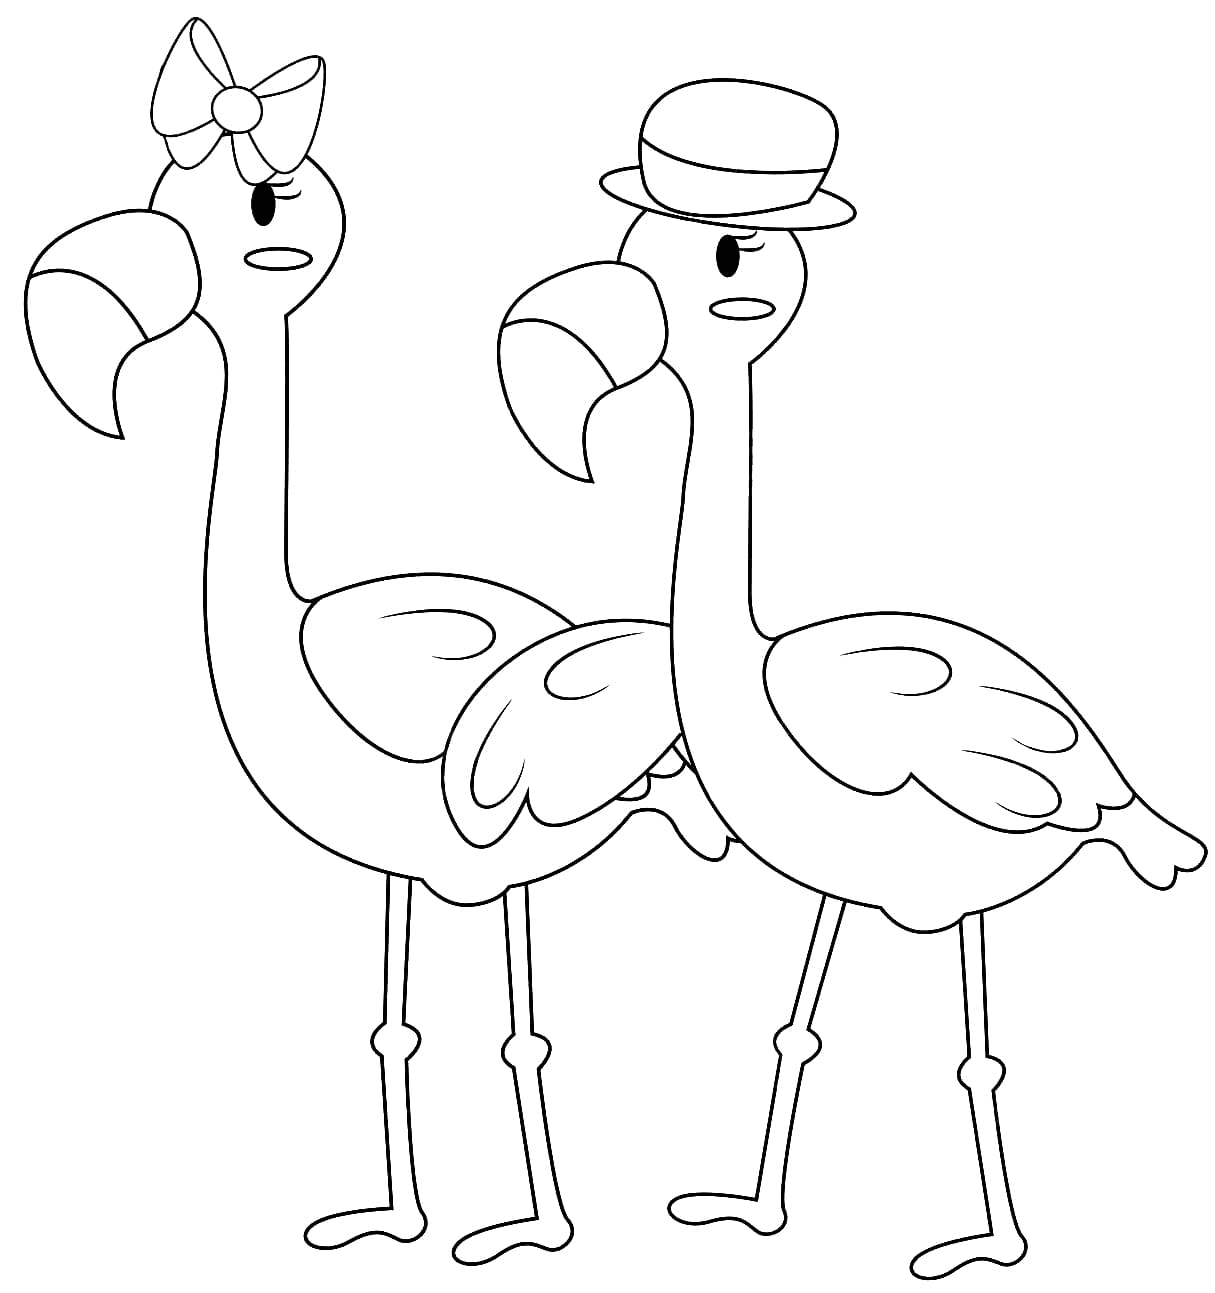 Mr Flamingo and Mrs Flamingo Coloring Pages